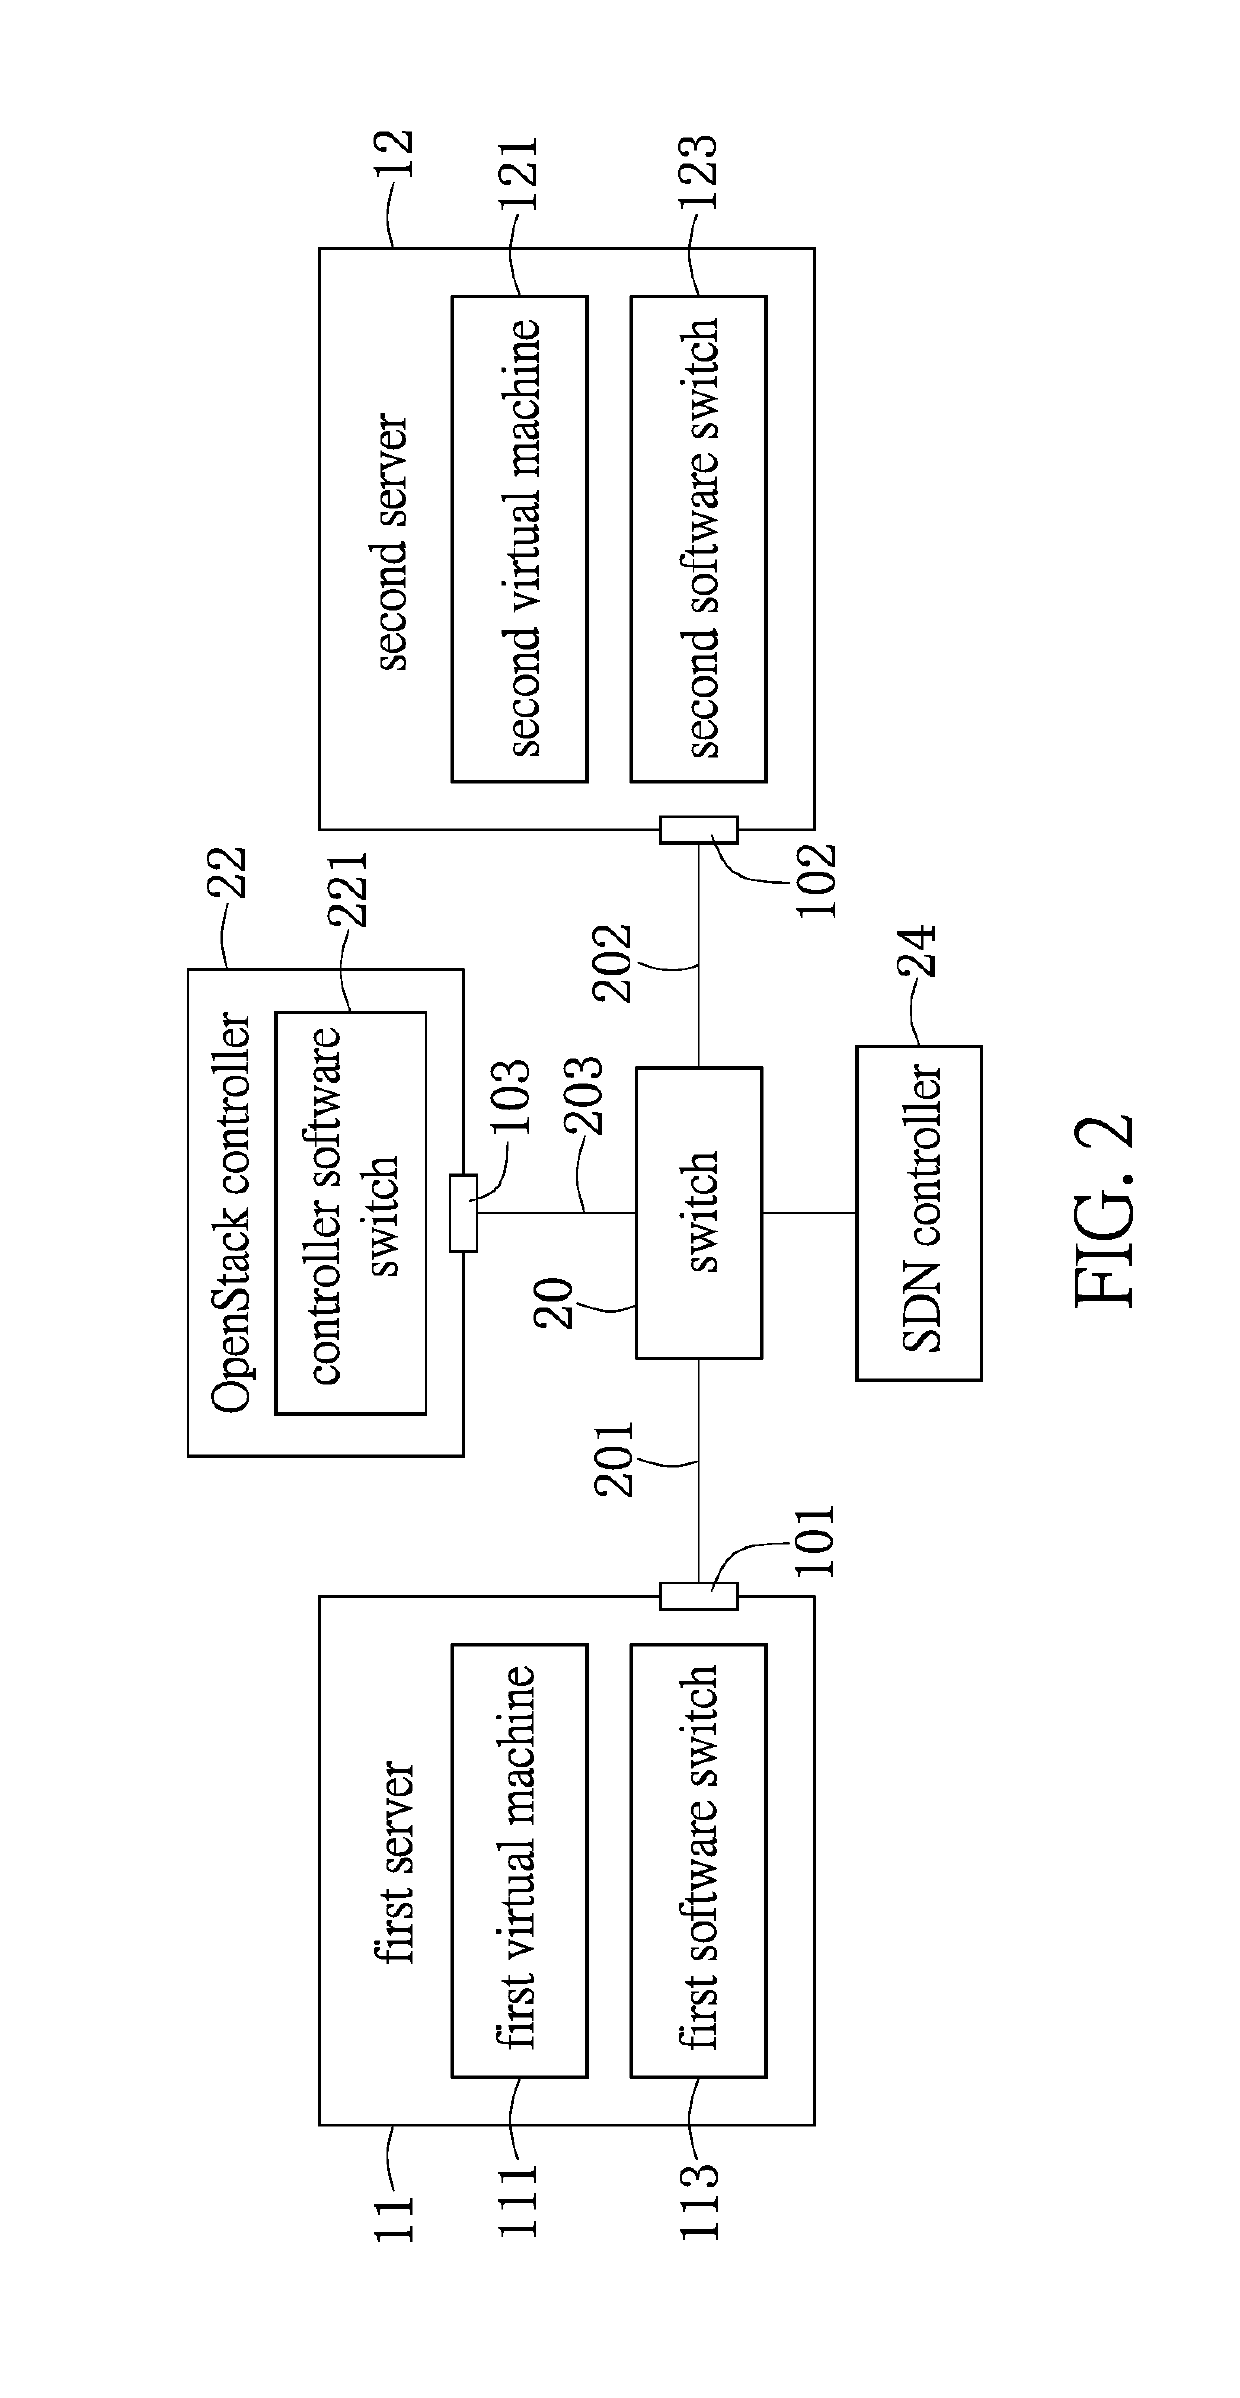 Method and system for extracting in-tunnel flow data over a virtual network